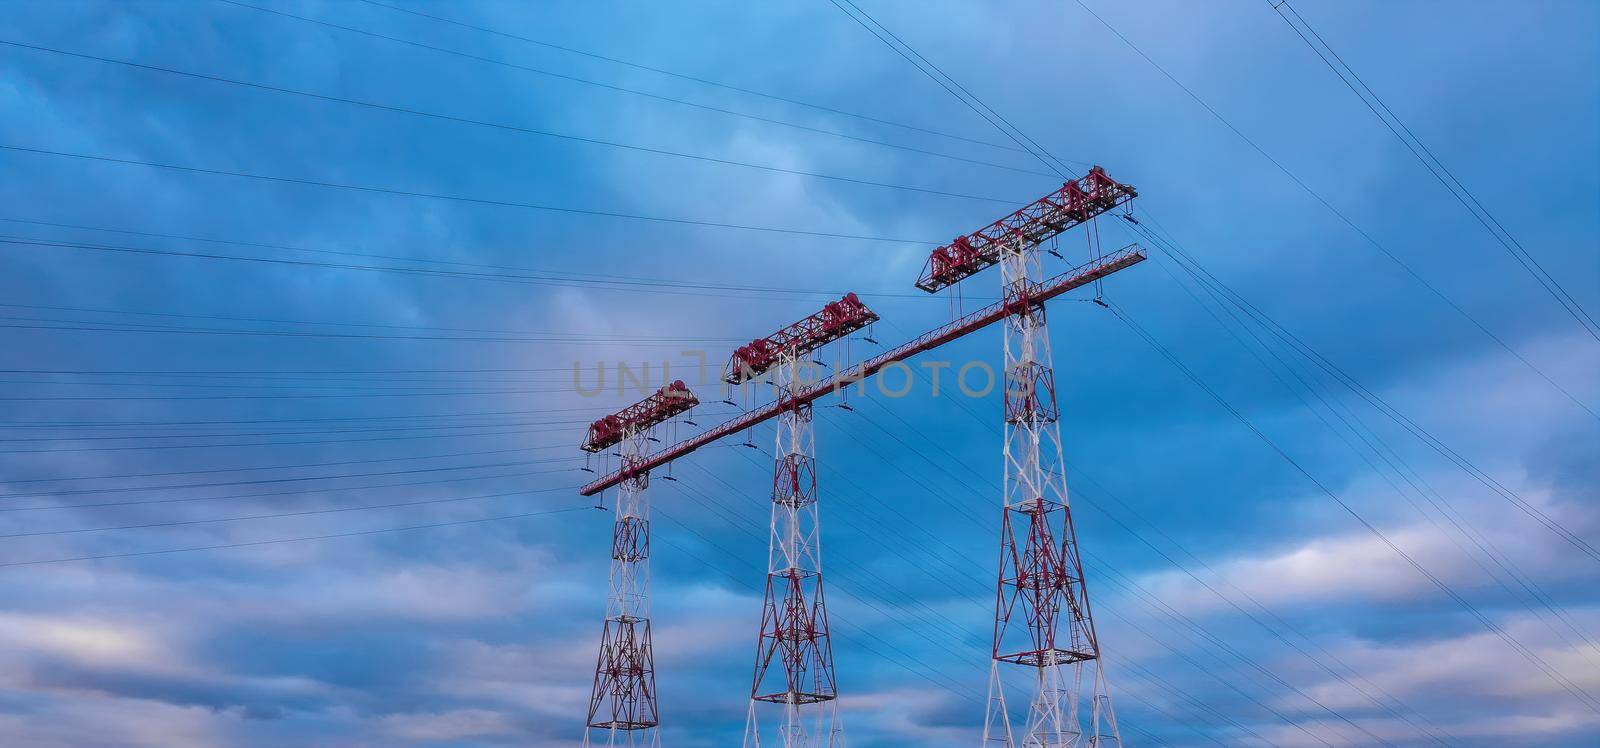 High voltage lines and power pylons in a sunset. landscape with clouds and blue sky. by igor010